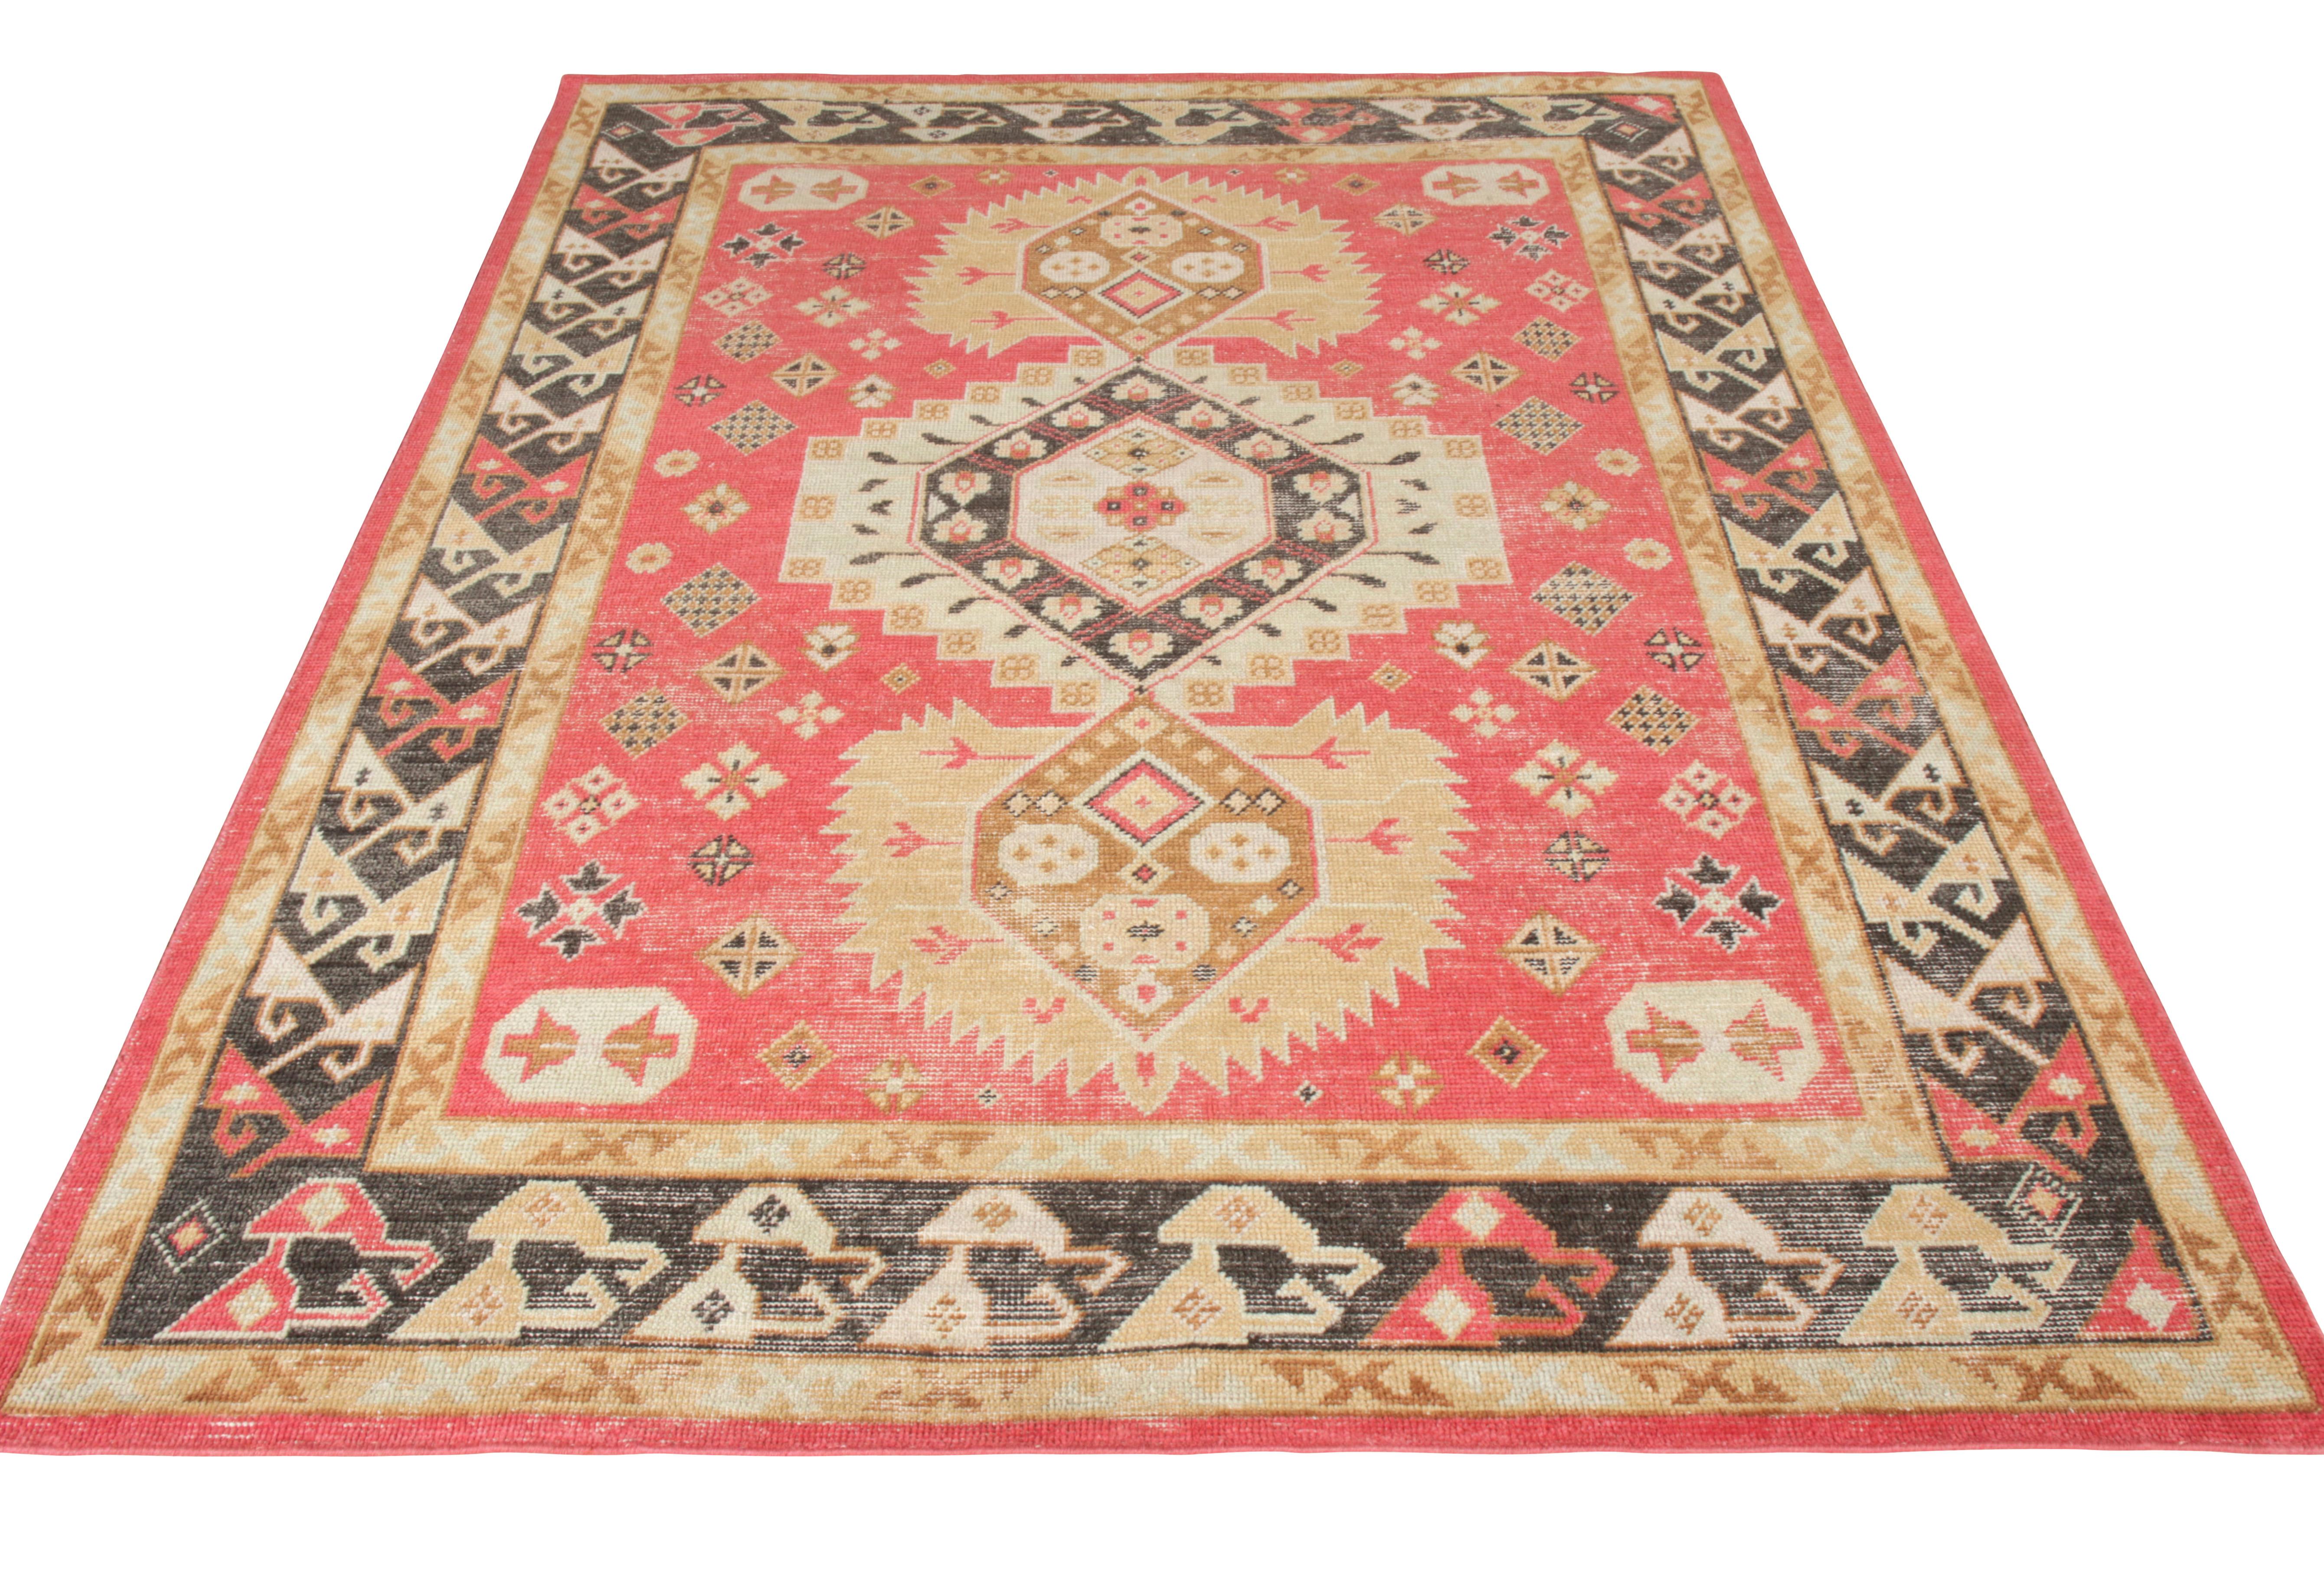 A square scale shabby chic style rug from Rug & Kilim’s Homage Collection. Hand knotted in wool, this defined piece is characterised by a distressed take on traditional pattern that sprawls confidently with a majestic red background in beige-brown